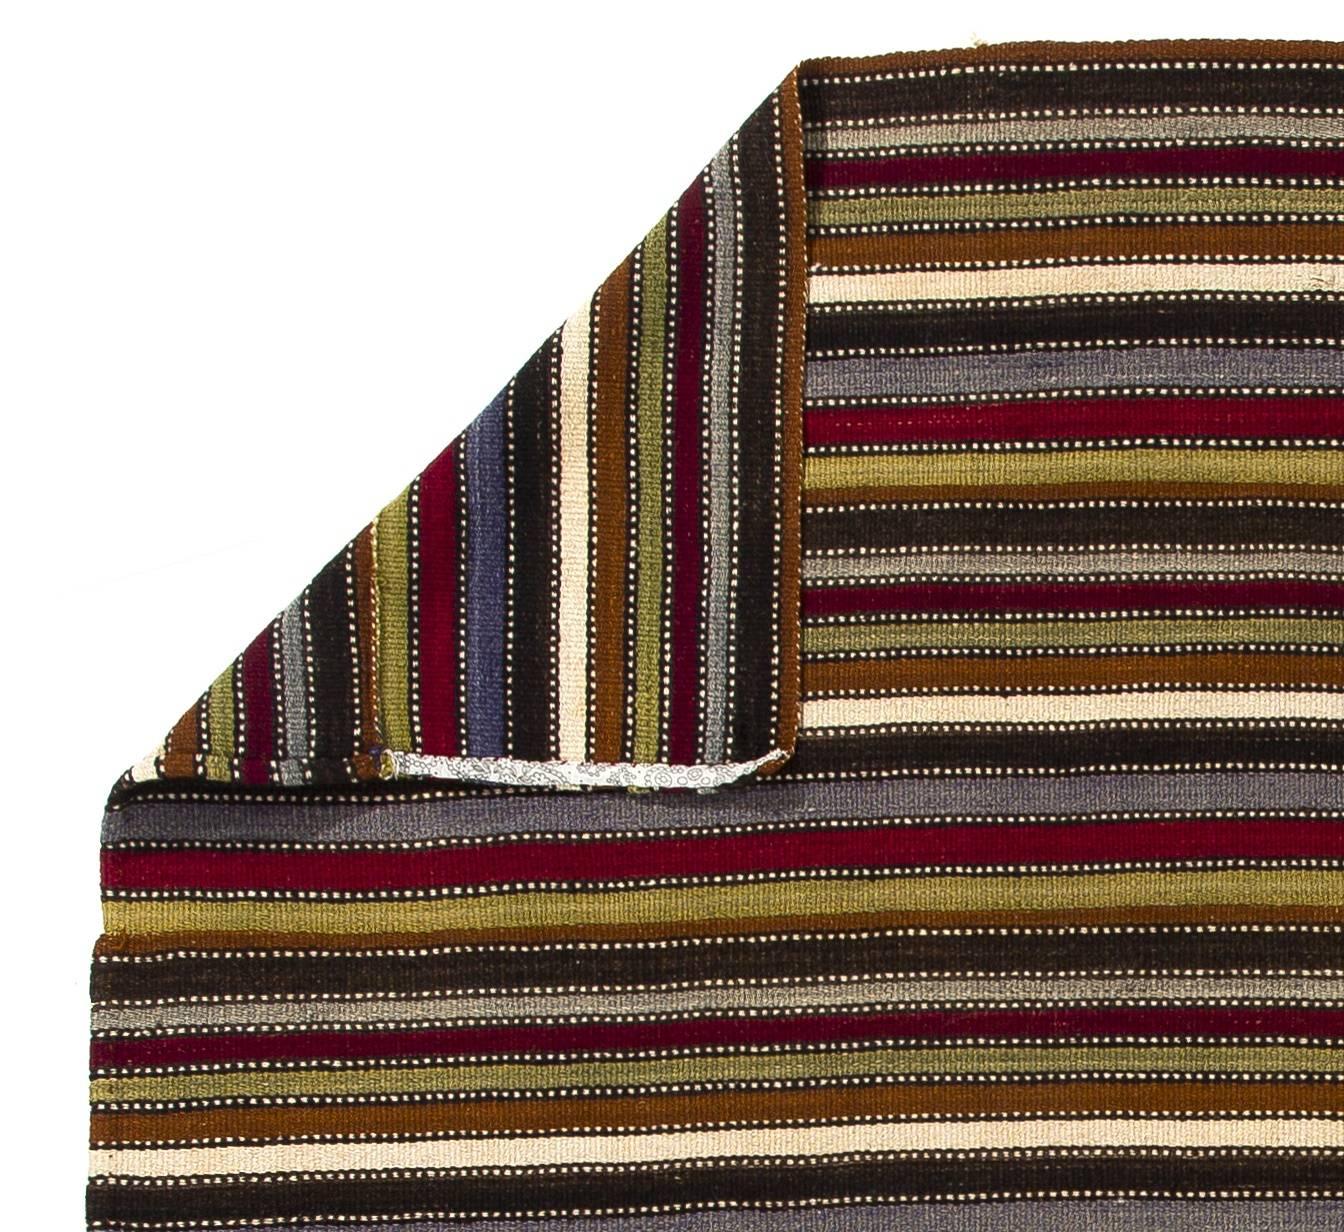 Hand-Woven 5.6x6 ft Handwoven Minimalist Vintage Striped Flat-Woven Turkish Wool Kilim Rug For Sale